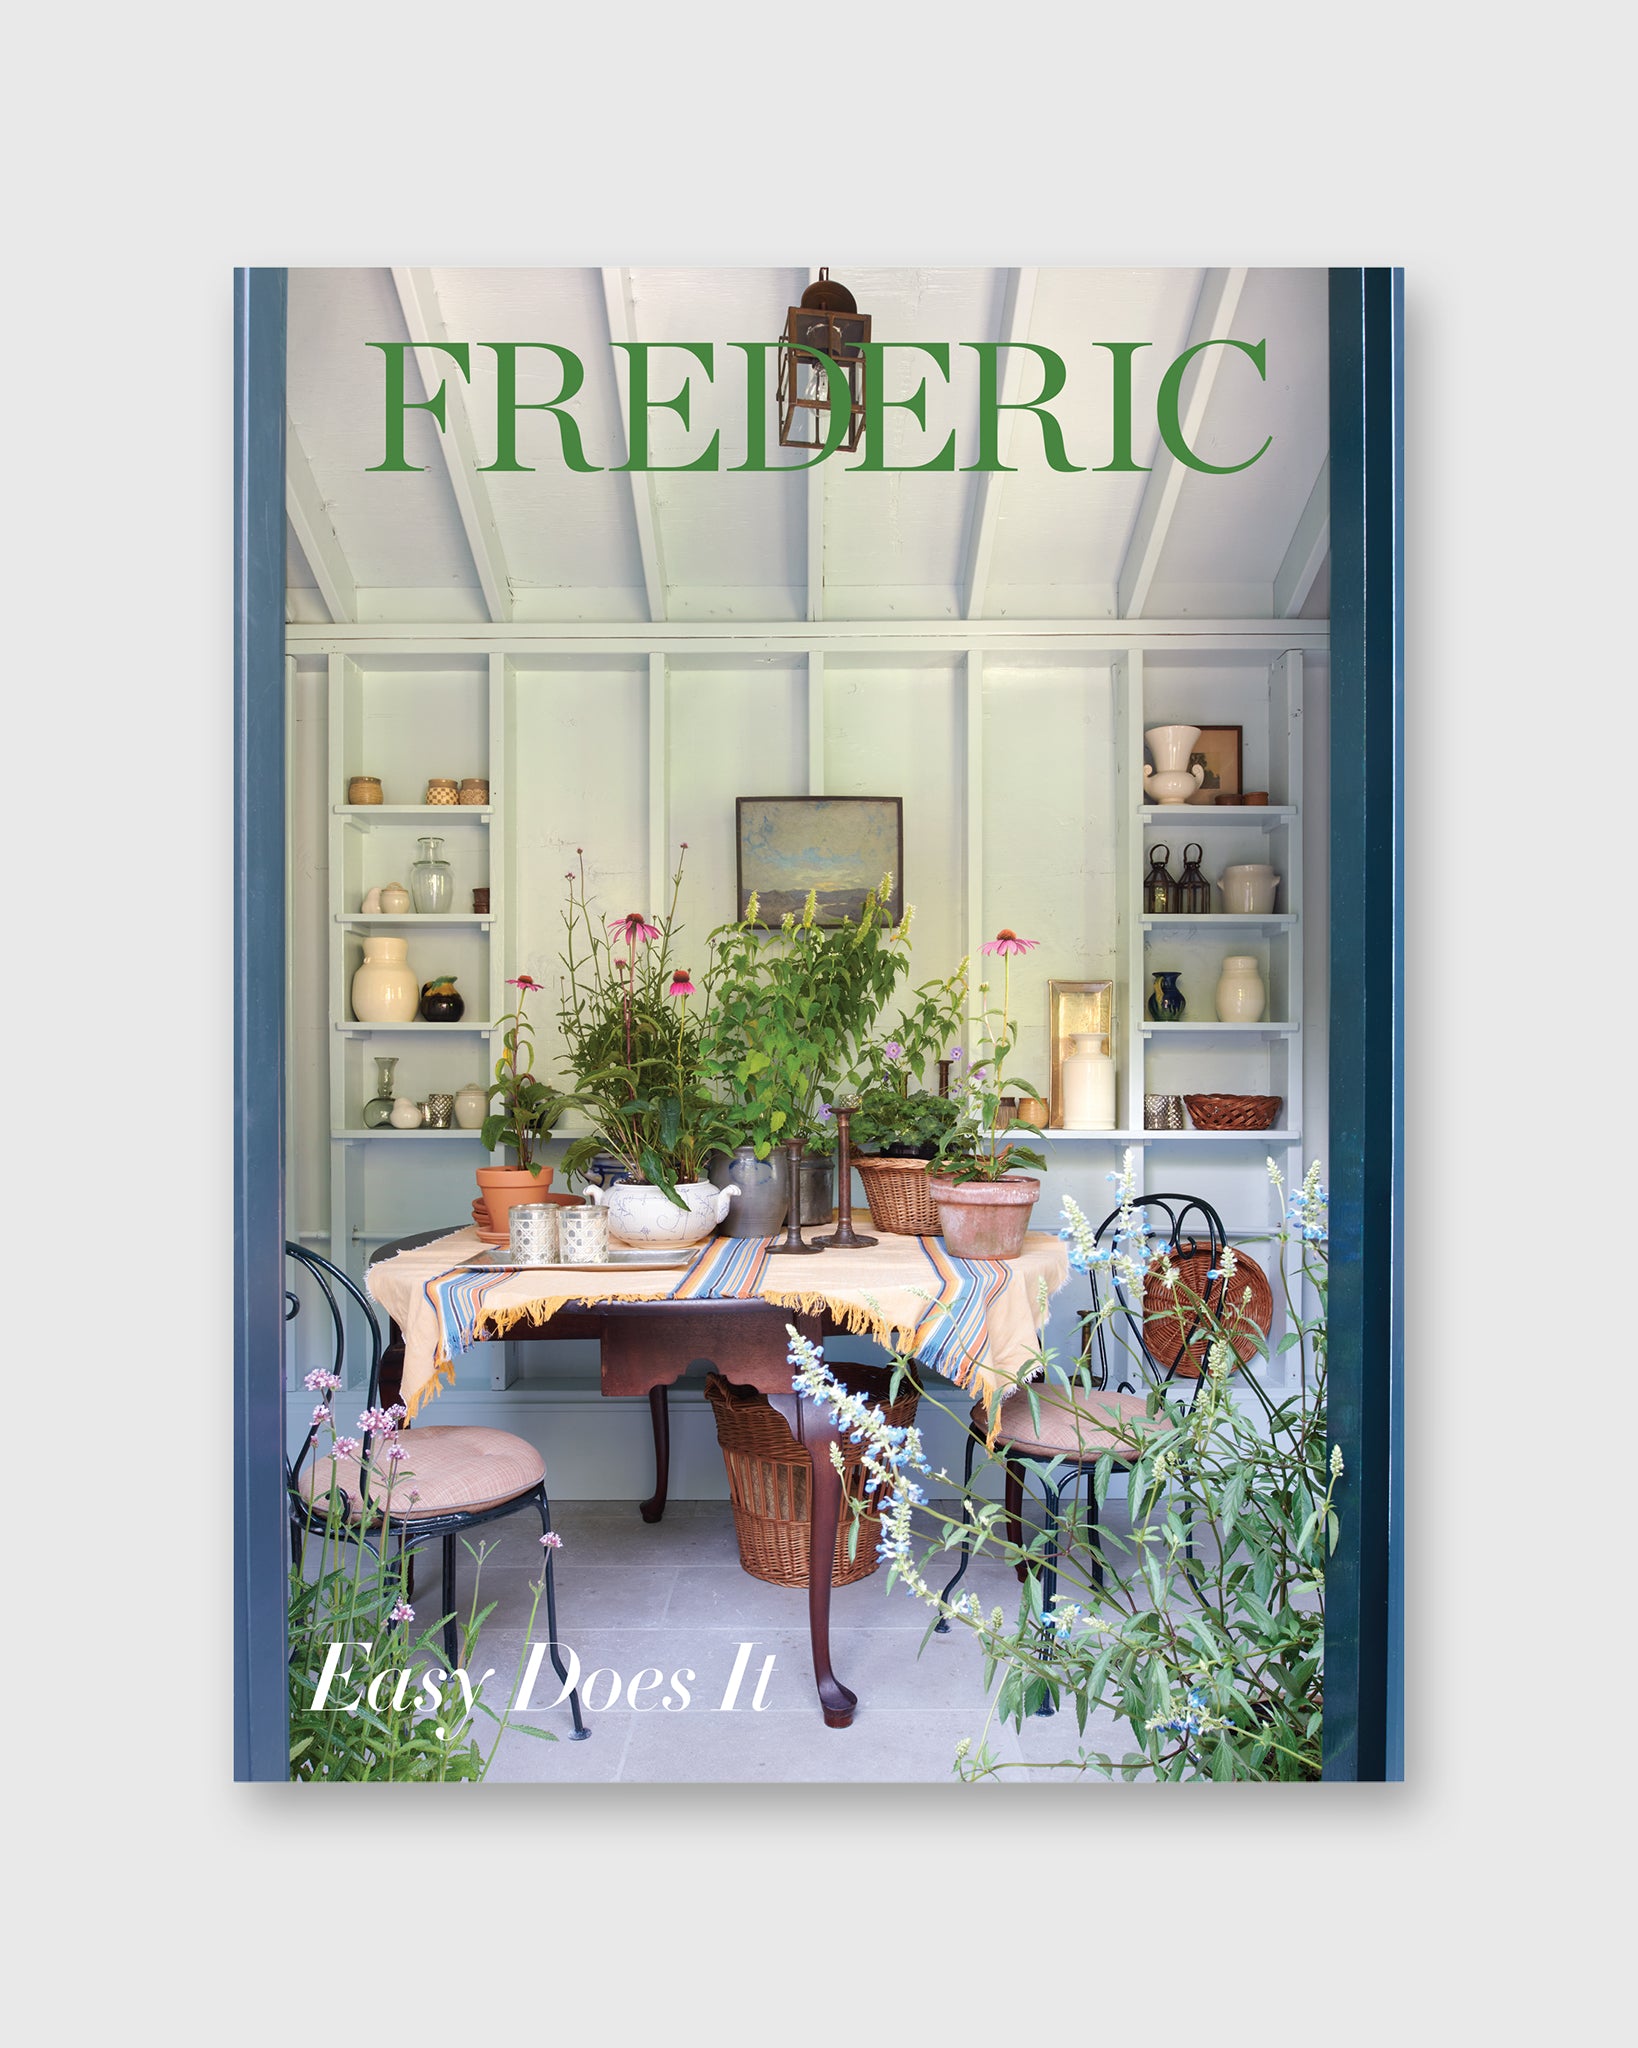 Frederic Magazine in Issue No. 8